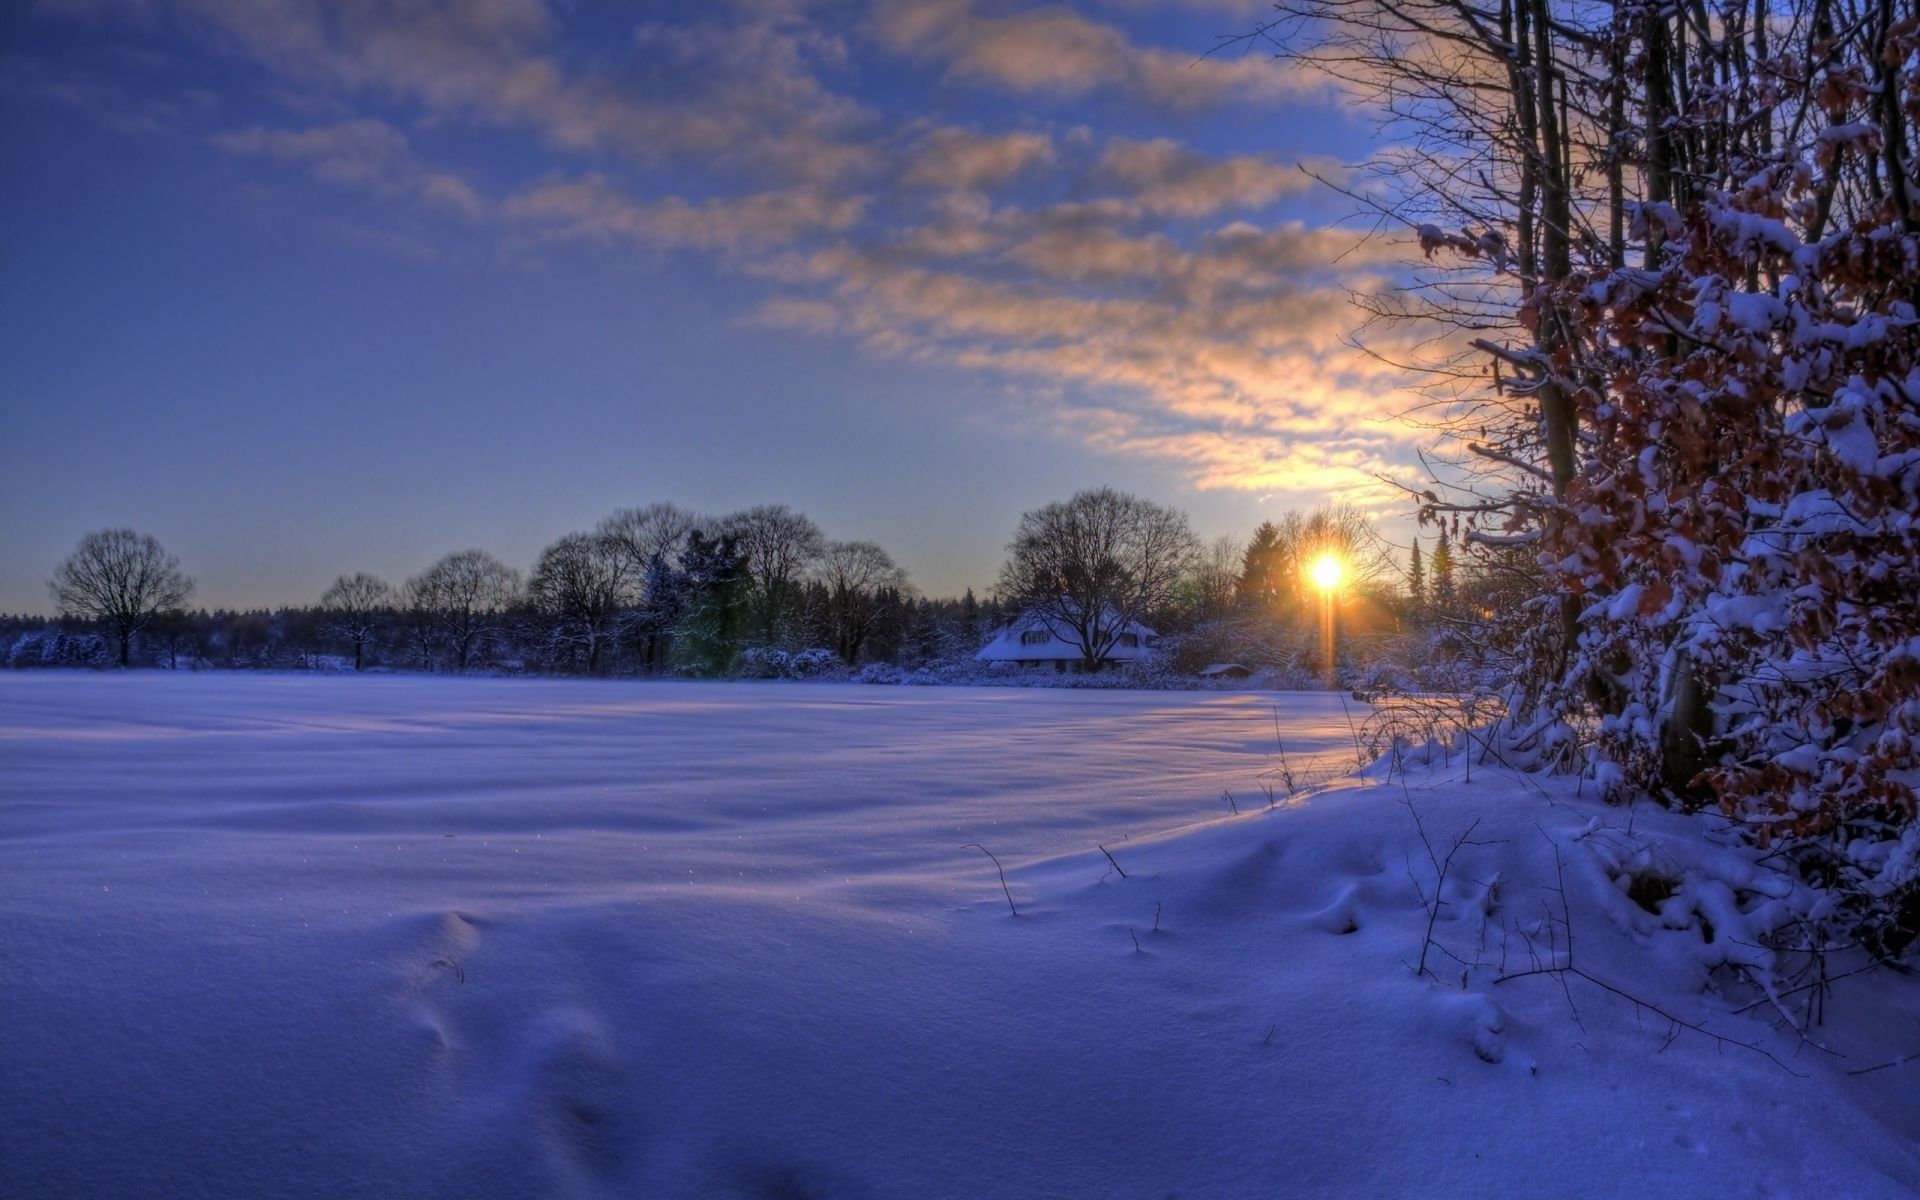 The morning sunrise of the winter sun, the beauty of nature deep winter